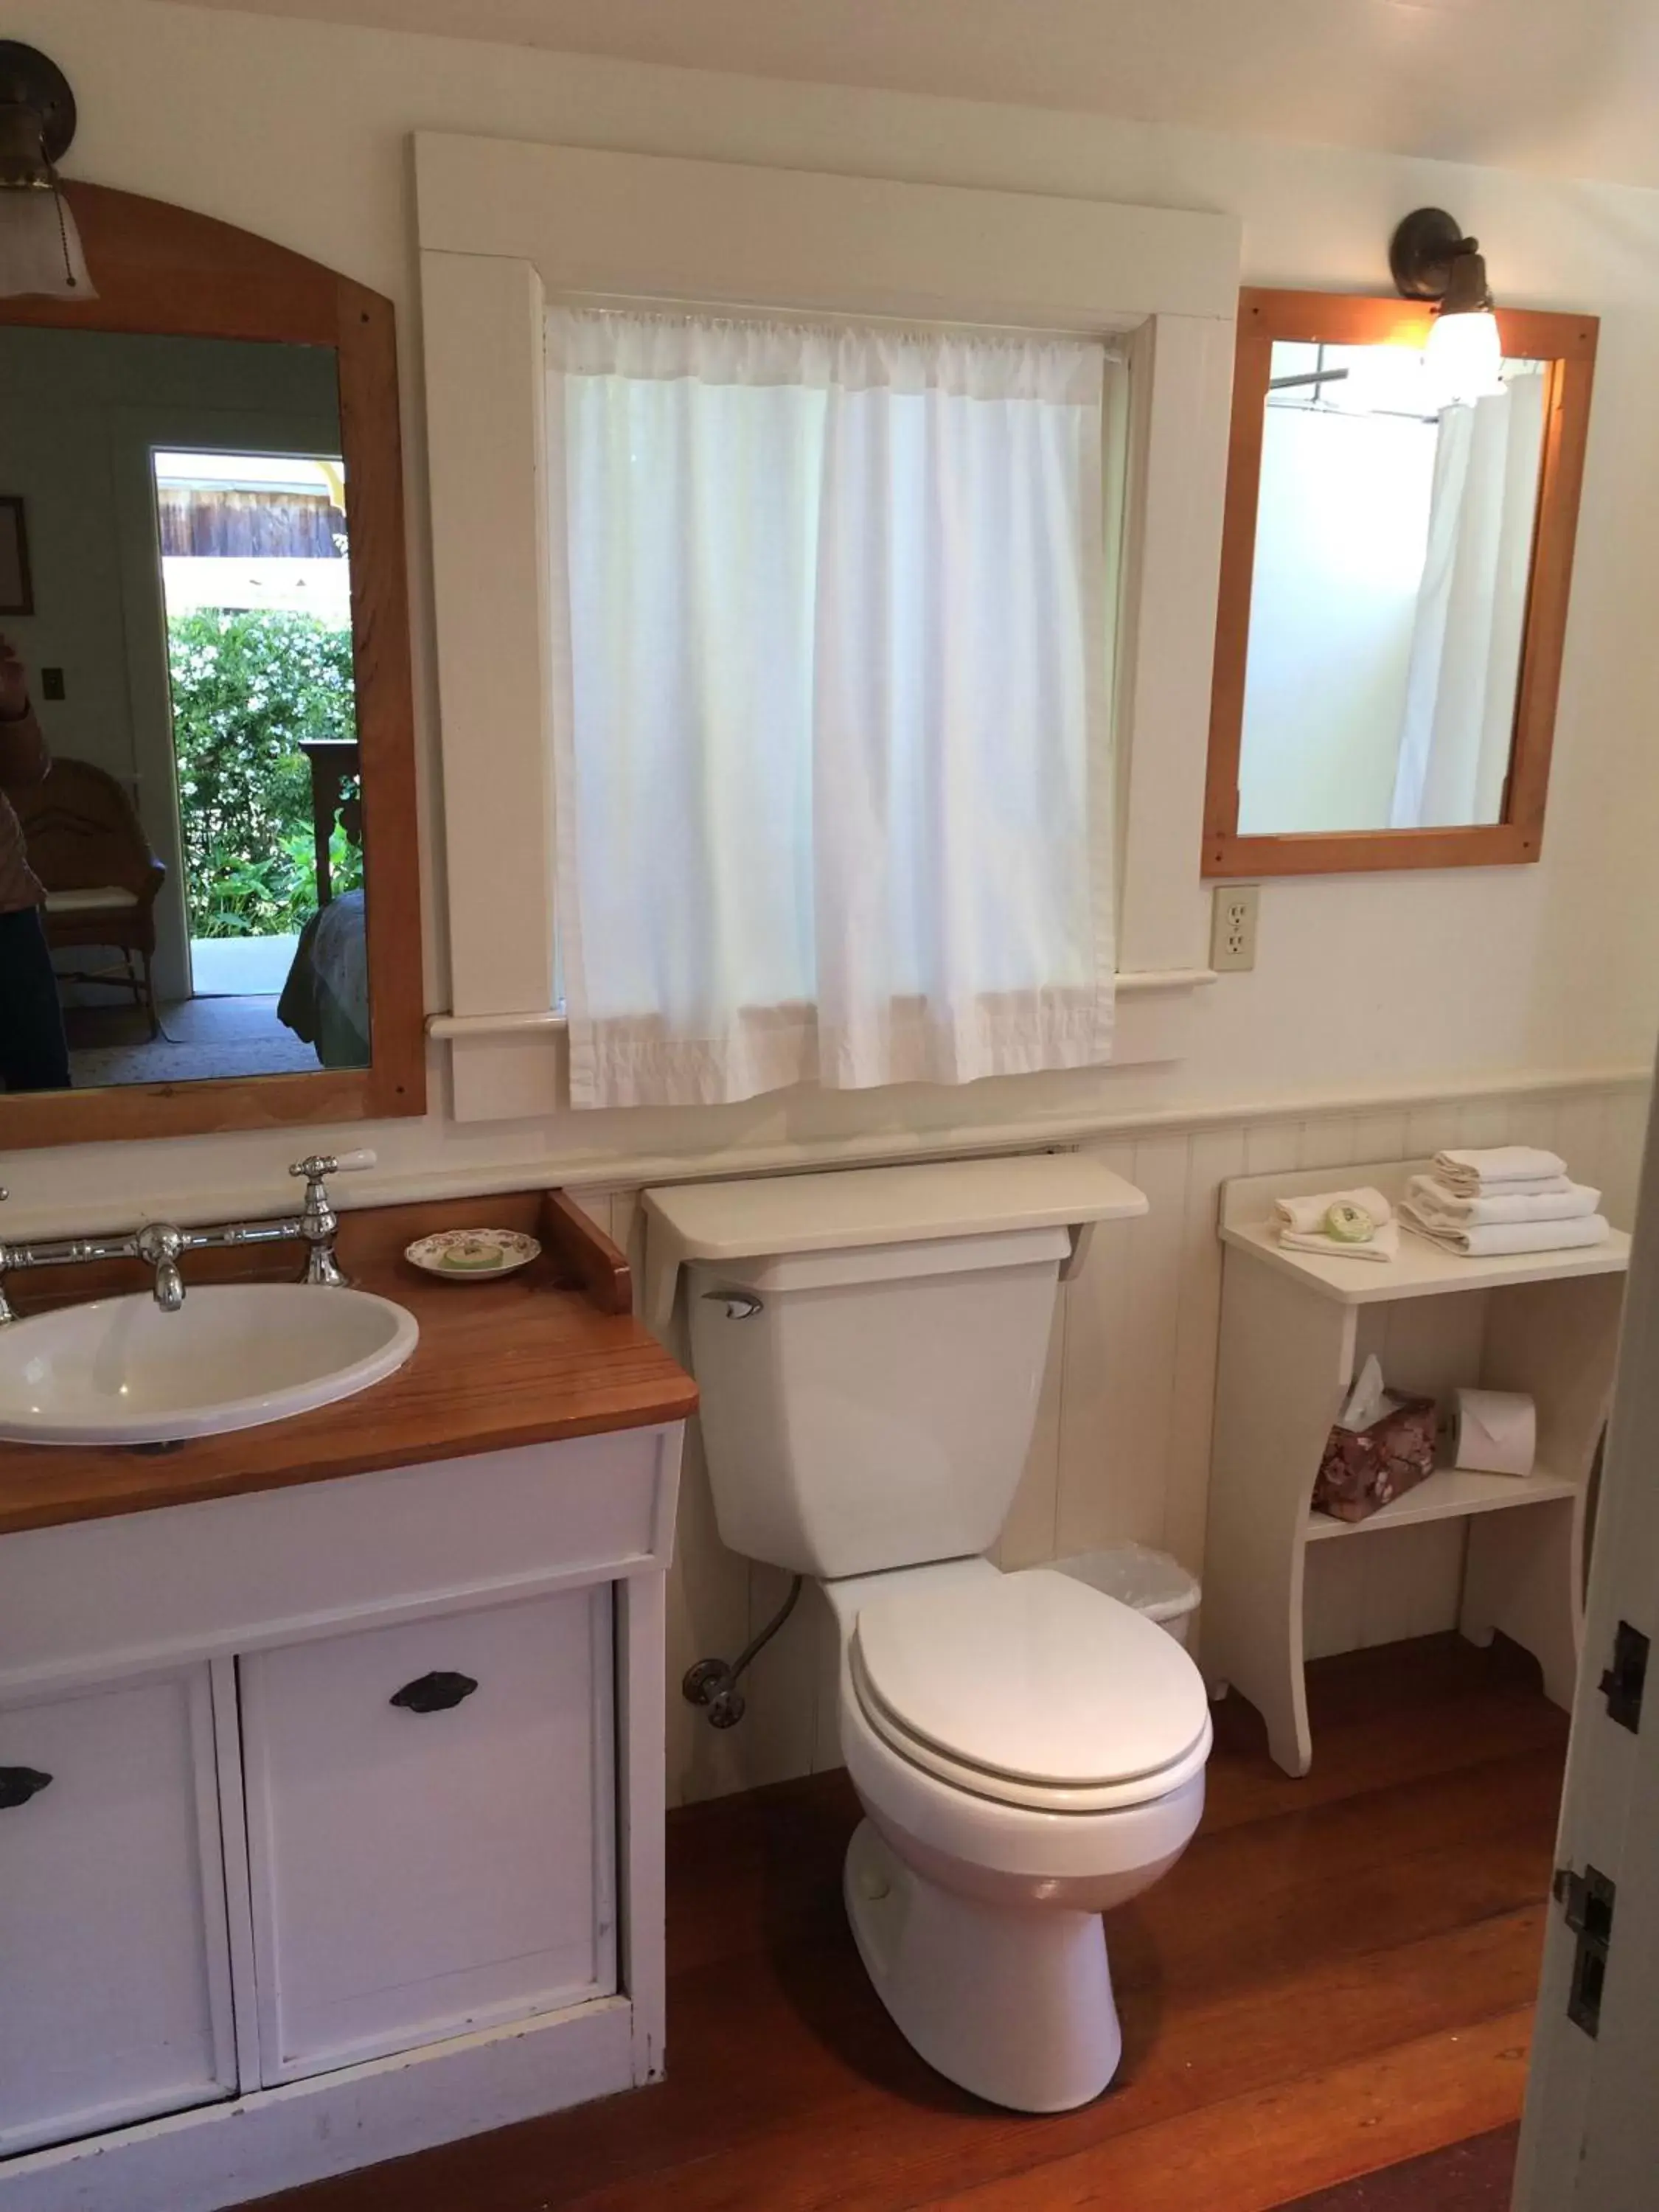 Bathroom in The Squibb Houses